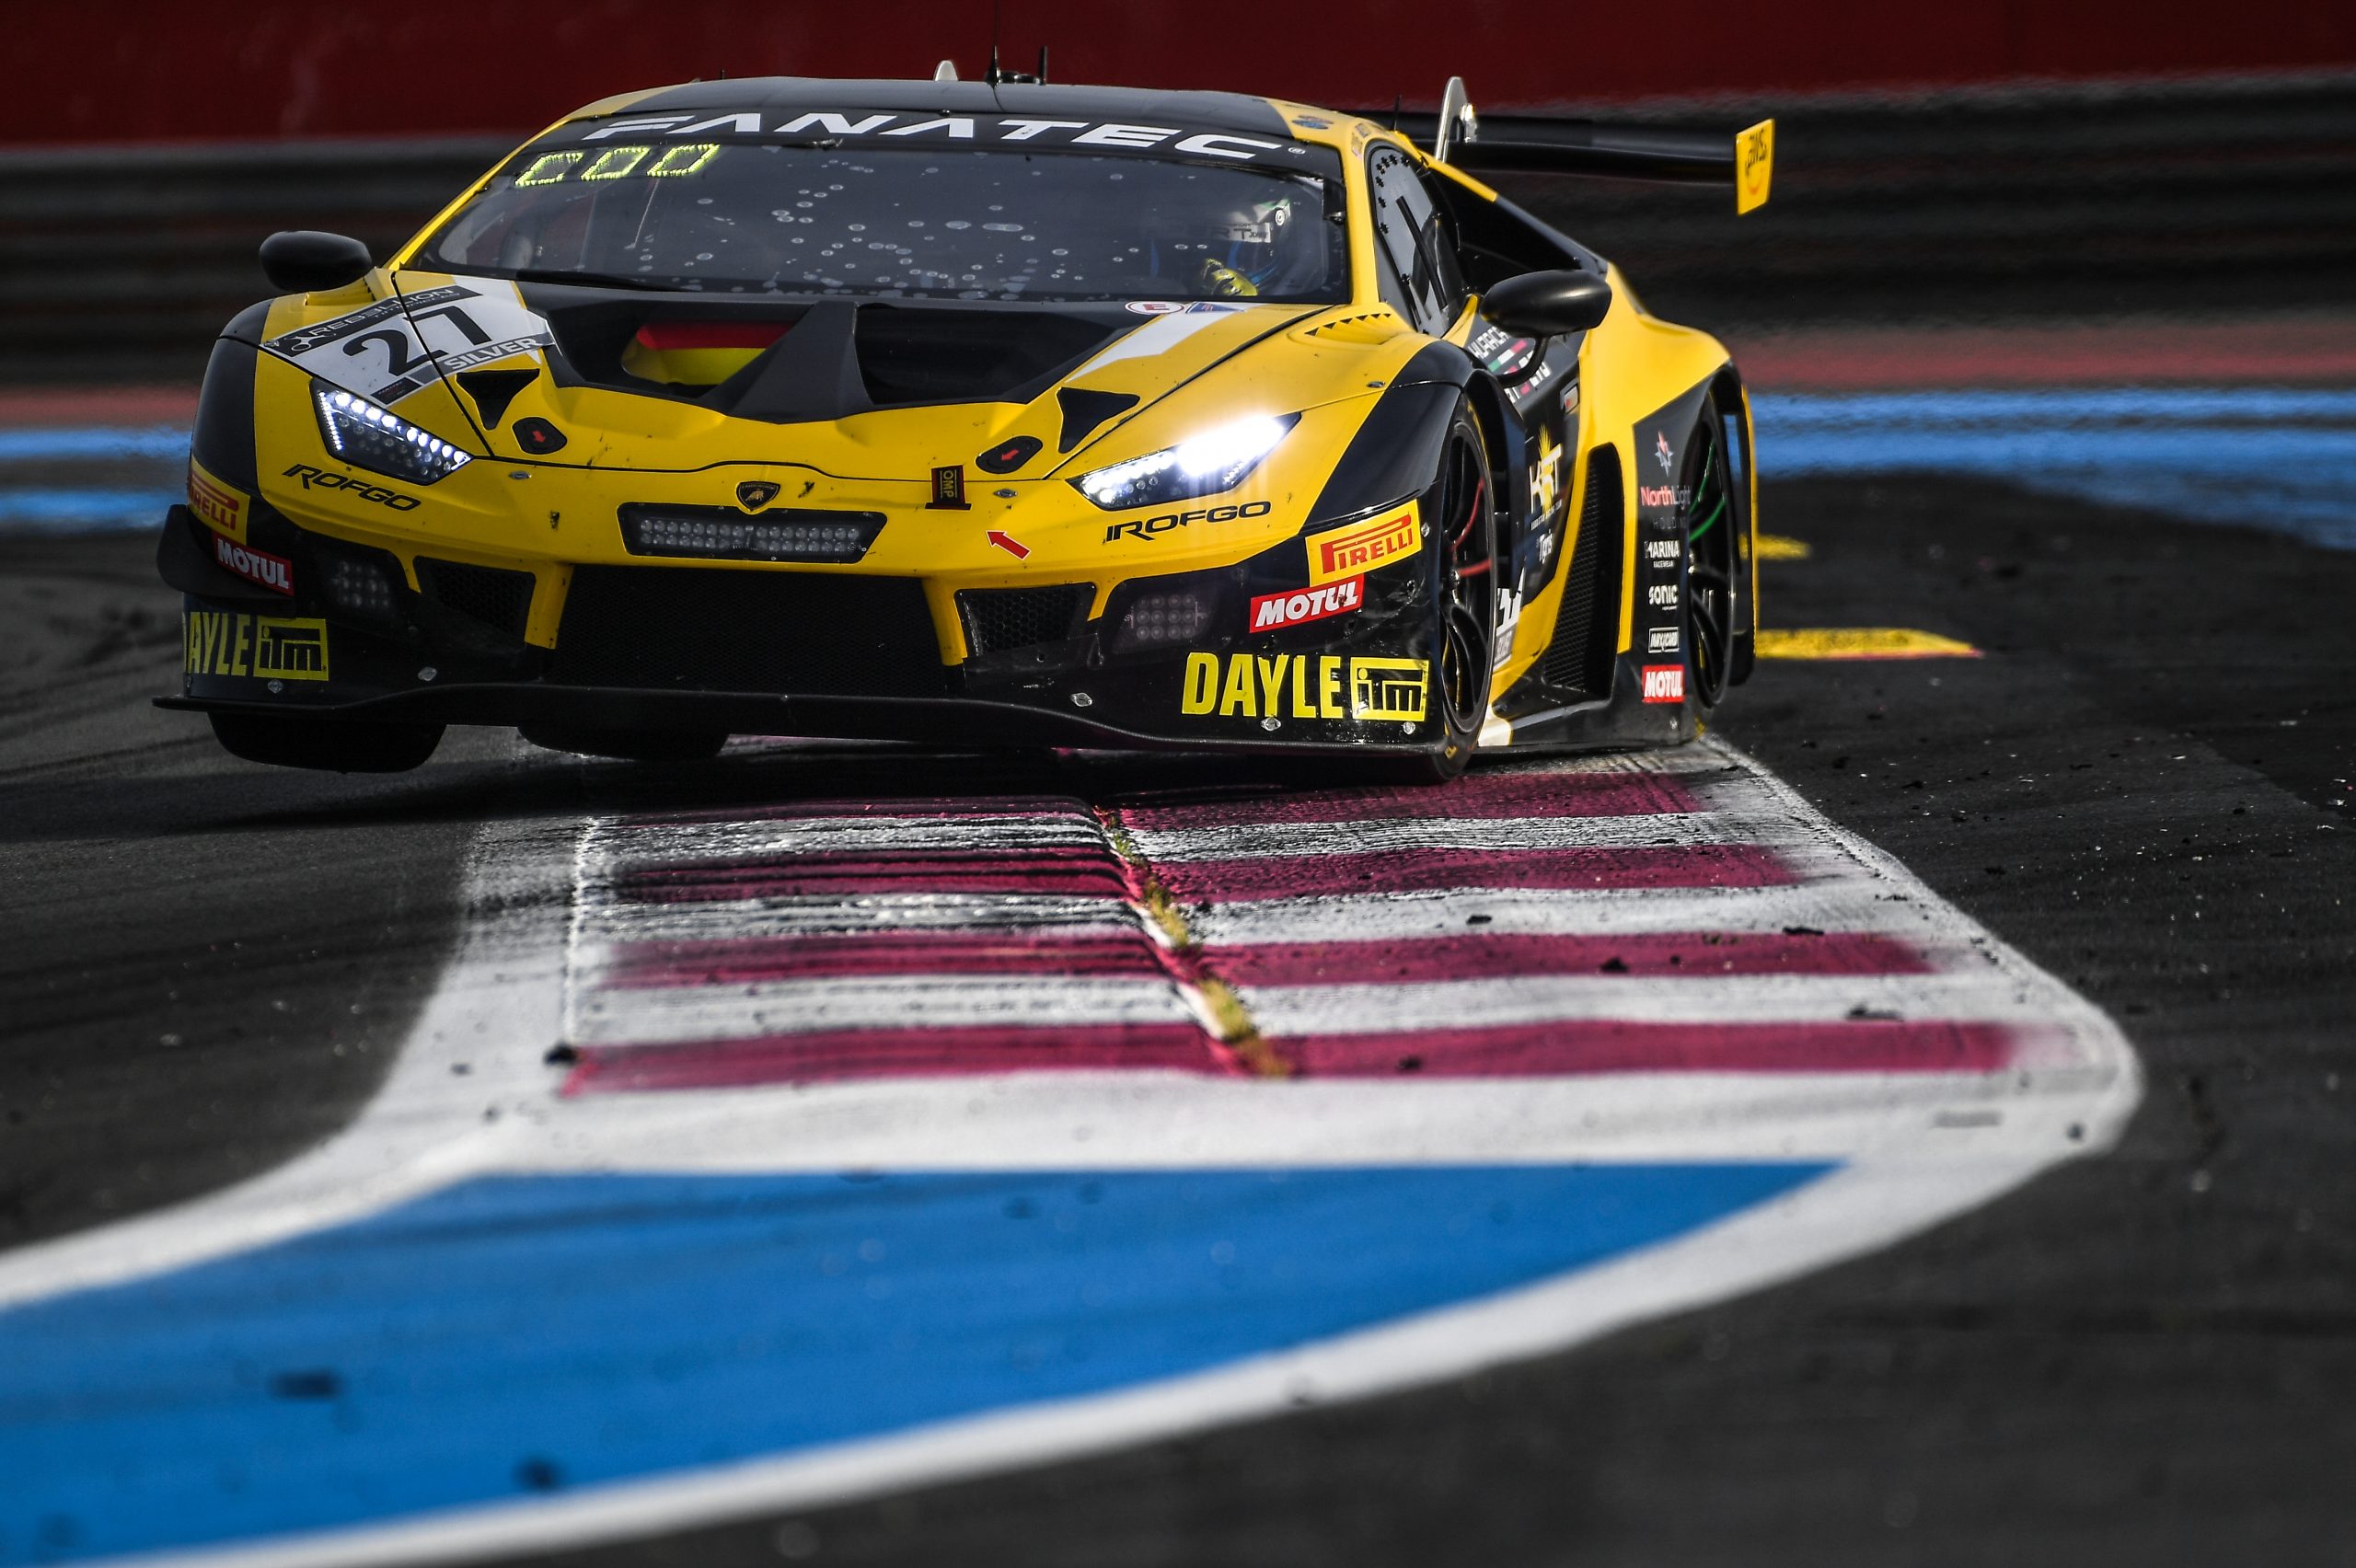 Podium successes and important championship points at Circuit Paul Ricard